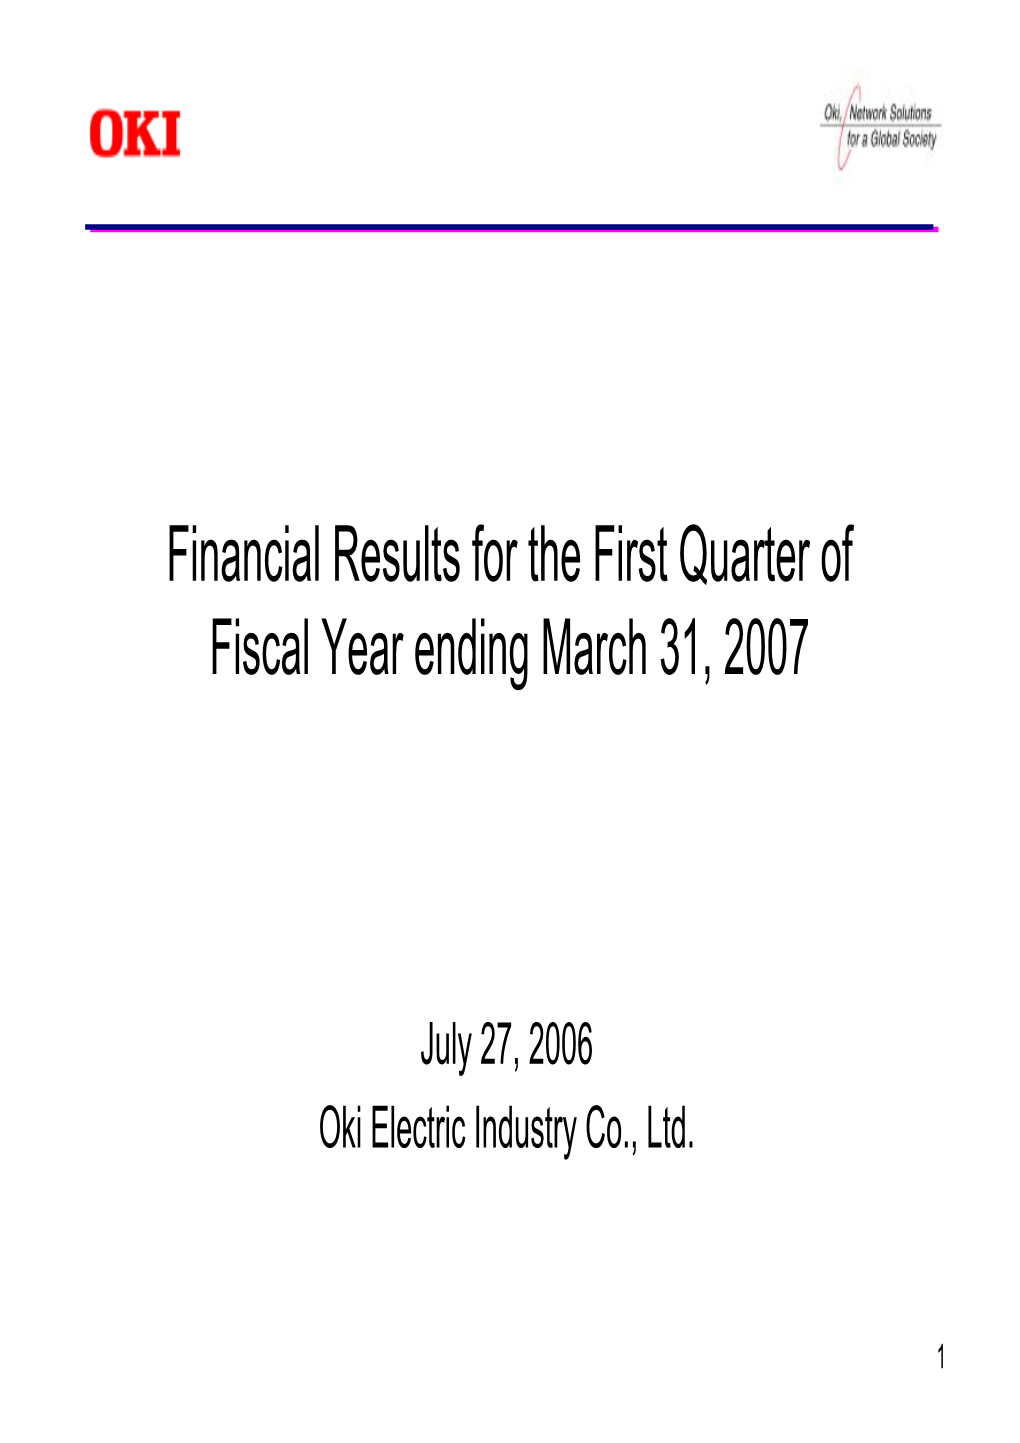 Financial Results for the First Quarter of Fiscal Year Ending March 31, 2007